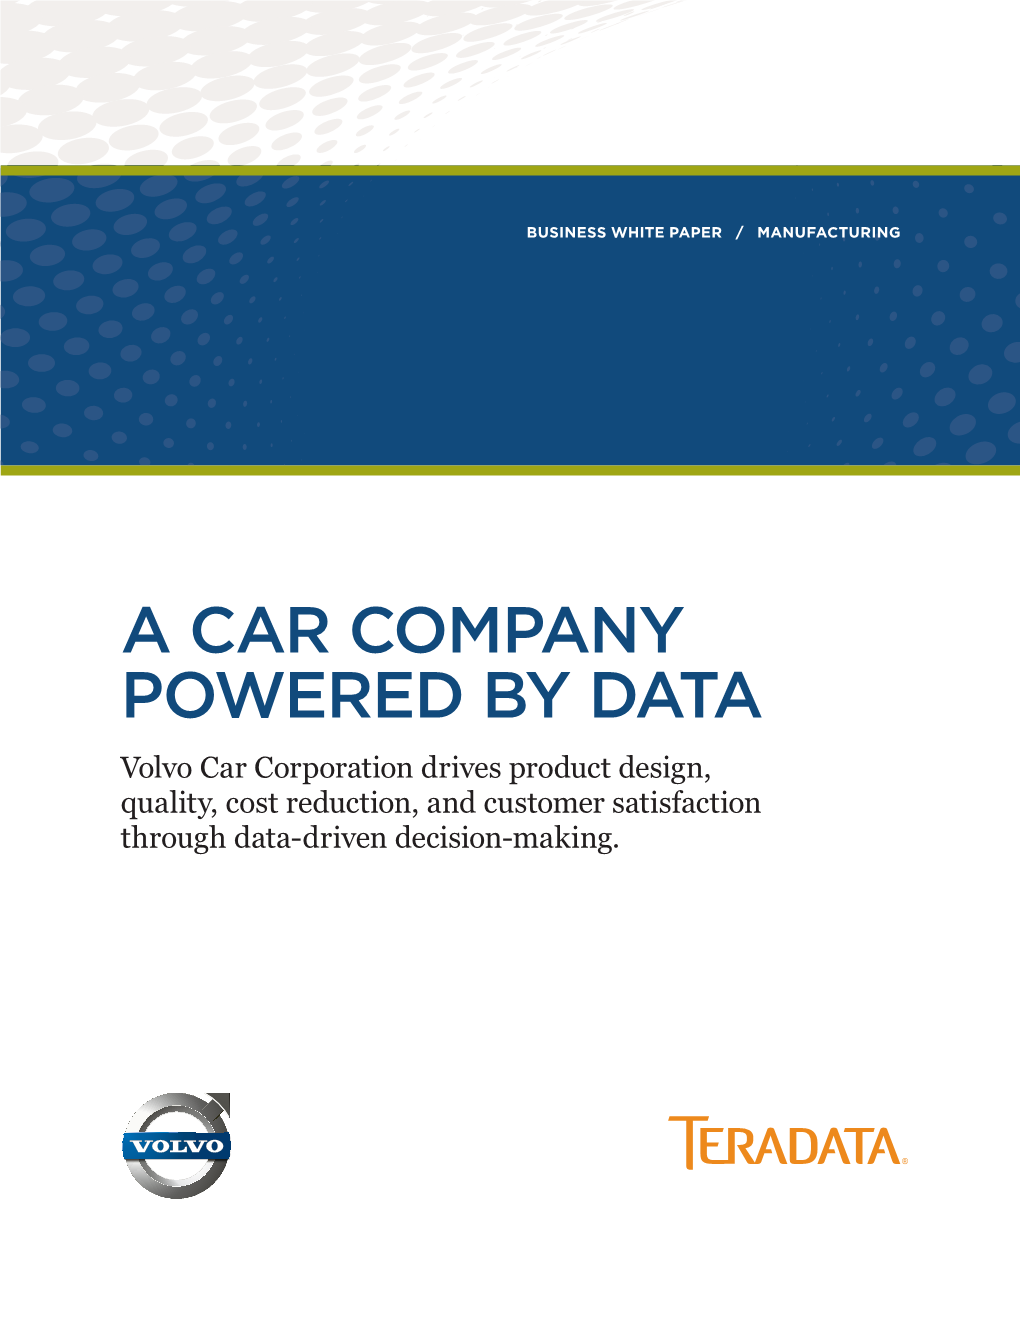 A Car Company Powered by Data Volvo Car Corporation Drives Product Design, Quality, Cost Reduction, and Customer Satisfaction Through Data-Driven Decision-Making